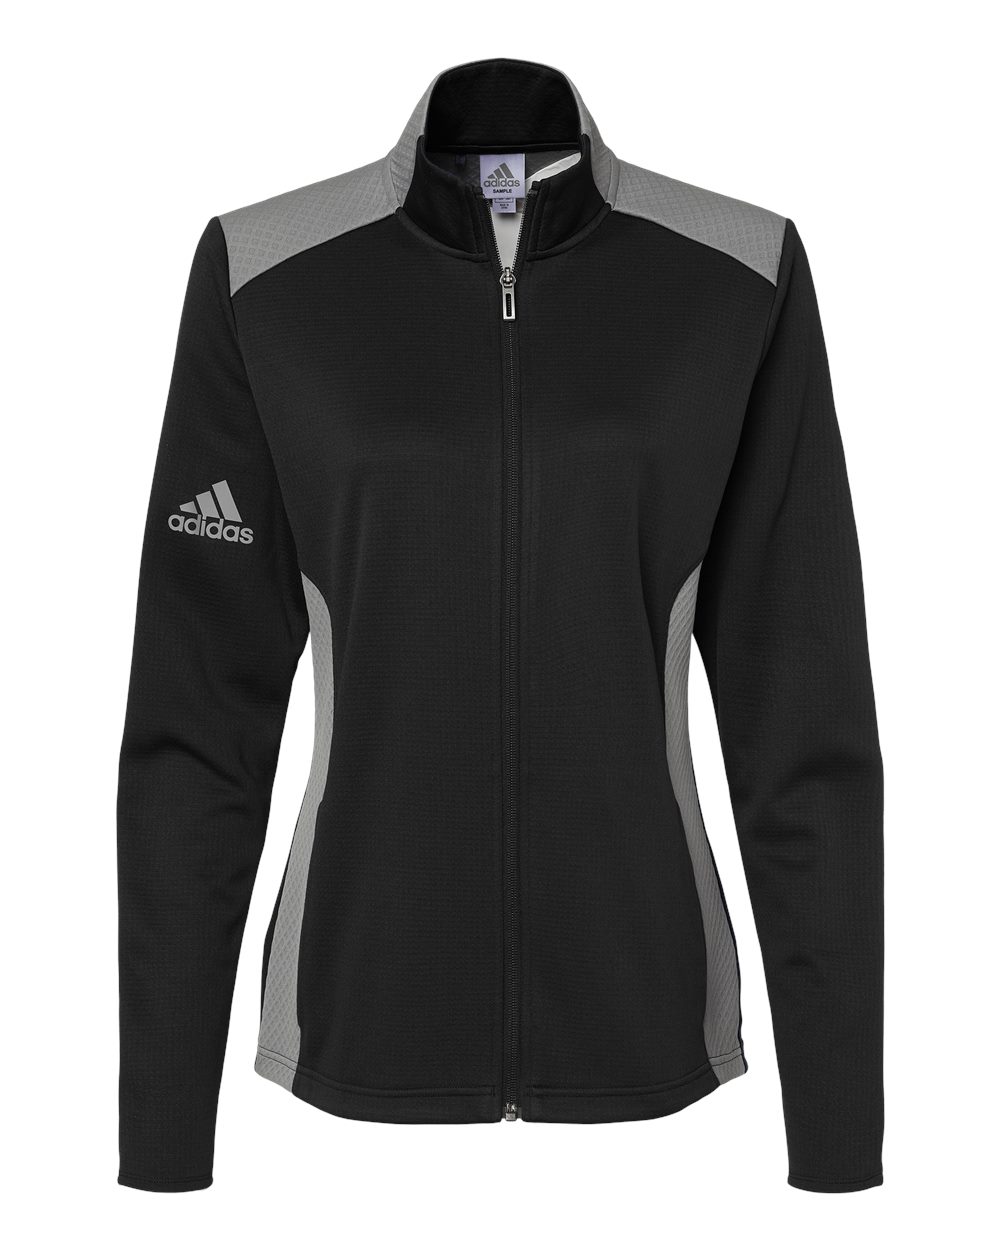 Picture of Adidas - Women's Textured Mixed Media Full-Zip Jacket 